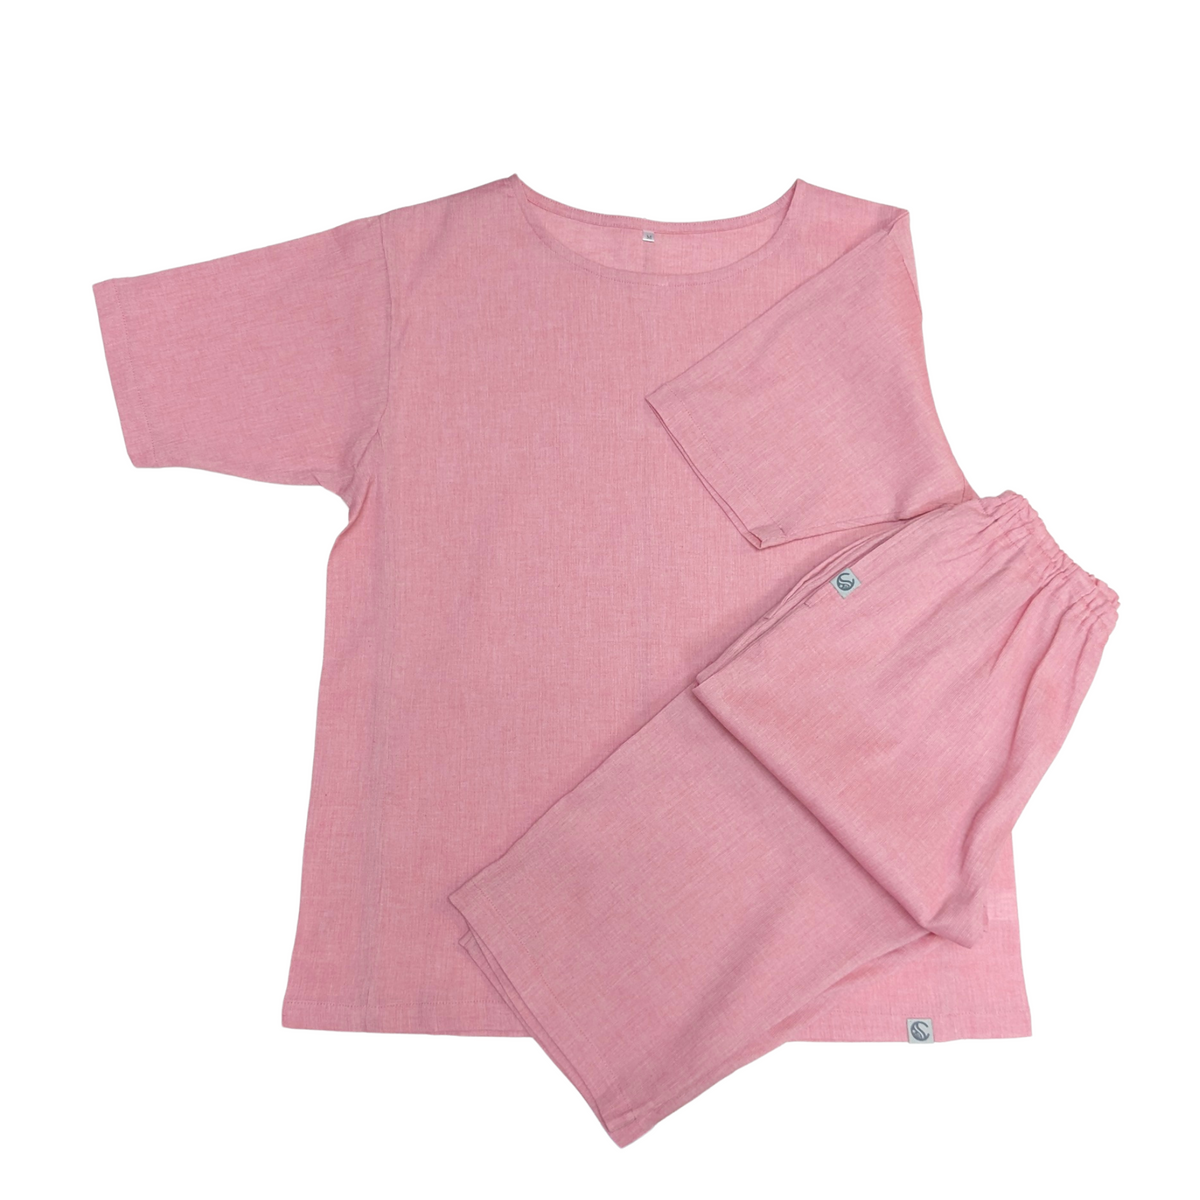 Cool, Stretchy, Comfy Lounge T-Shirt & Pants | Unisex | Solid Color | Pink, Navy, Gray